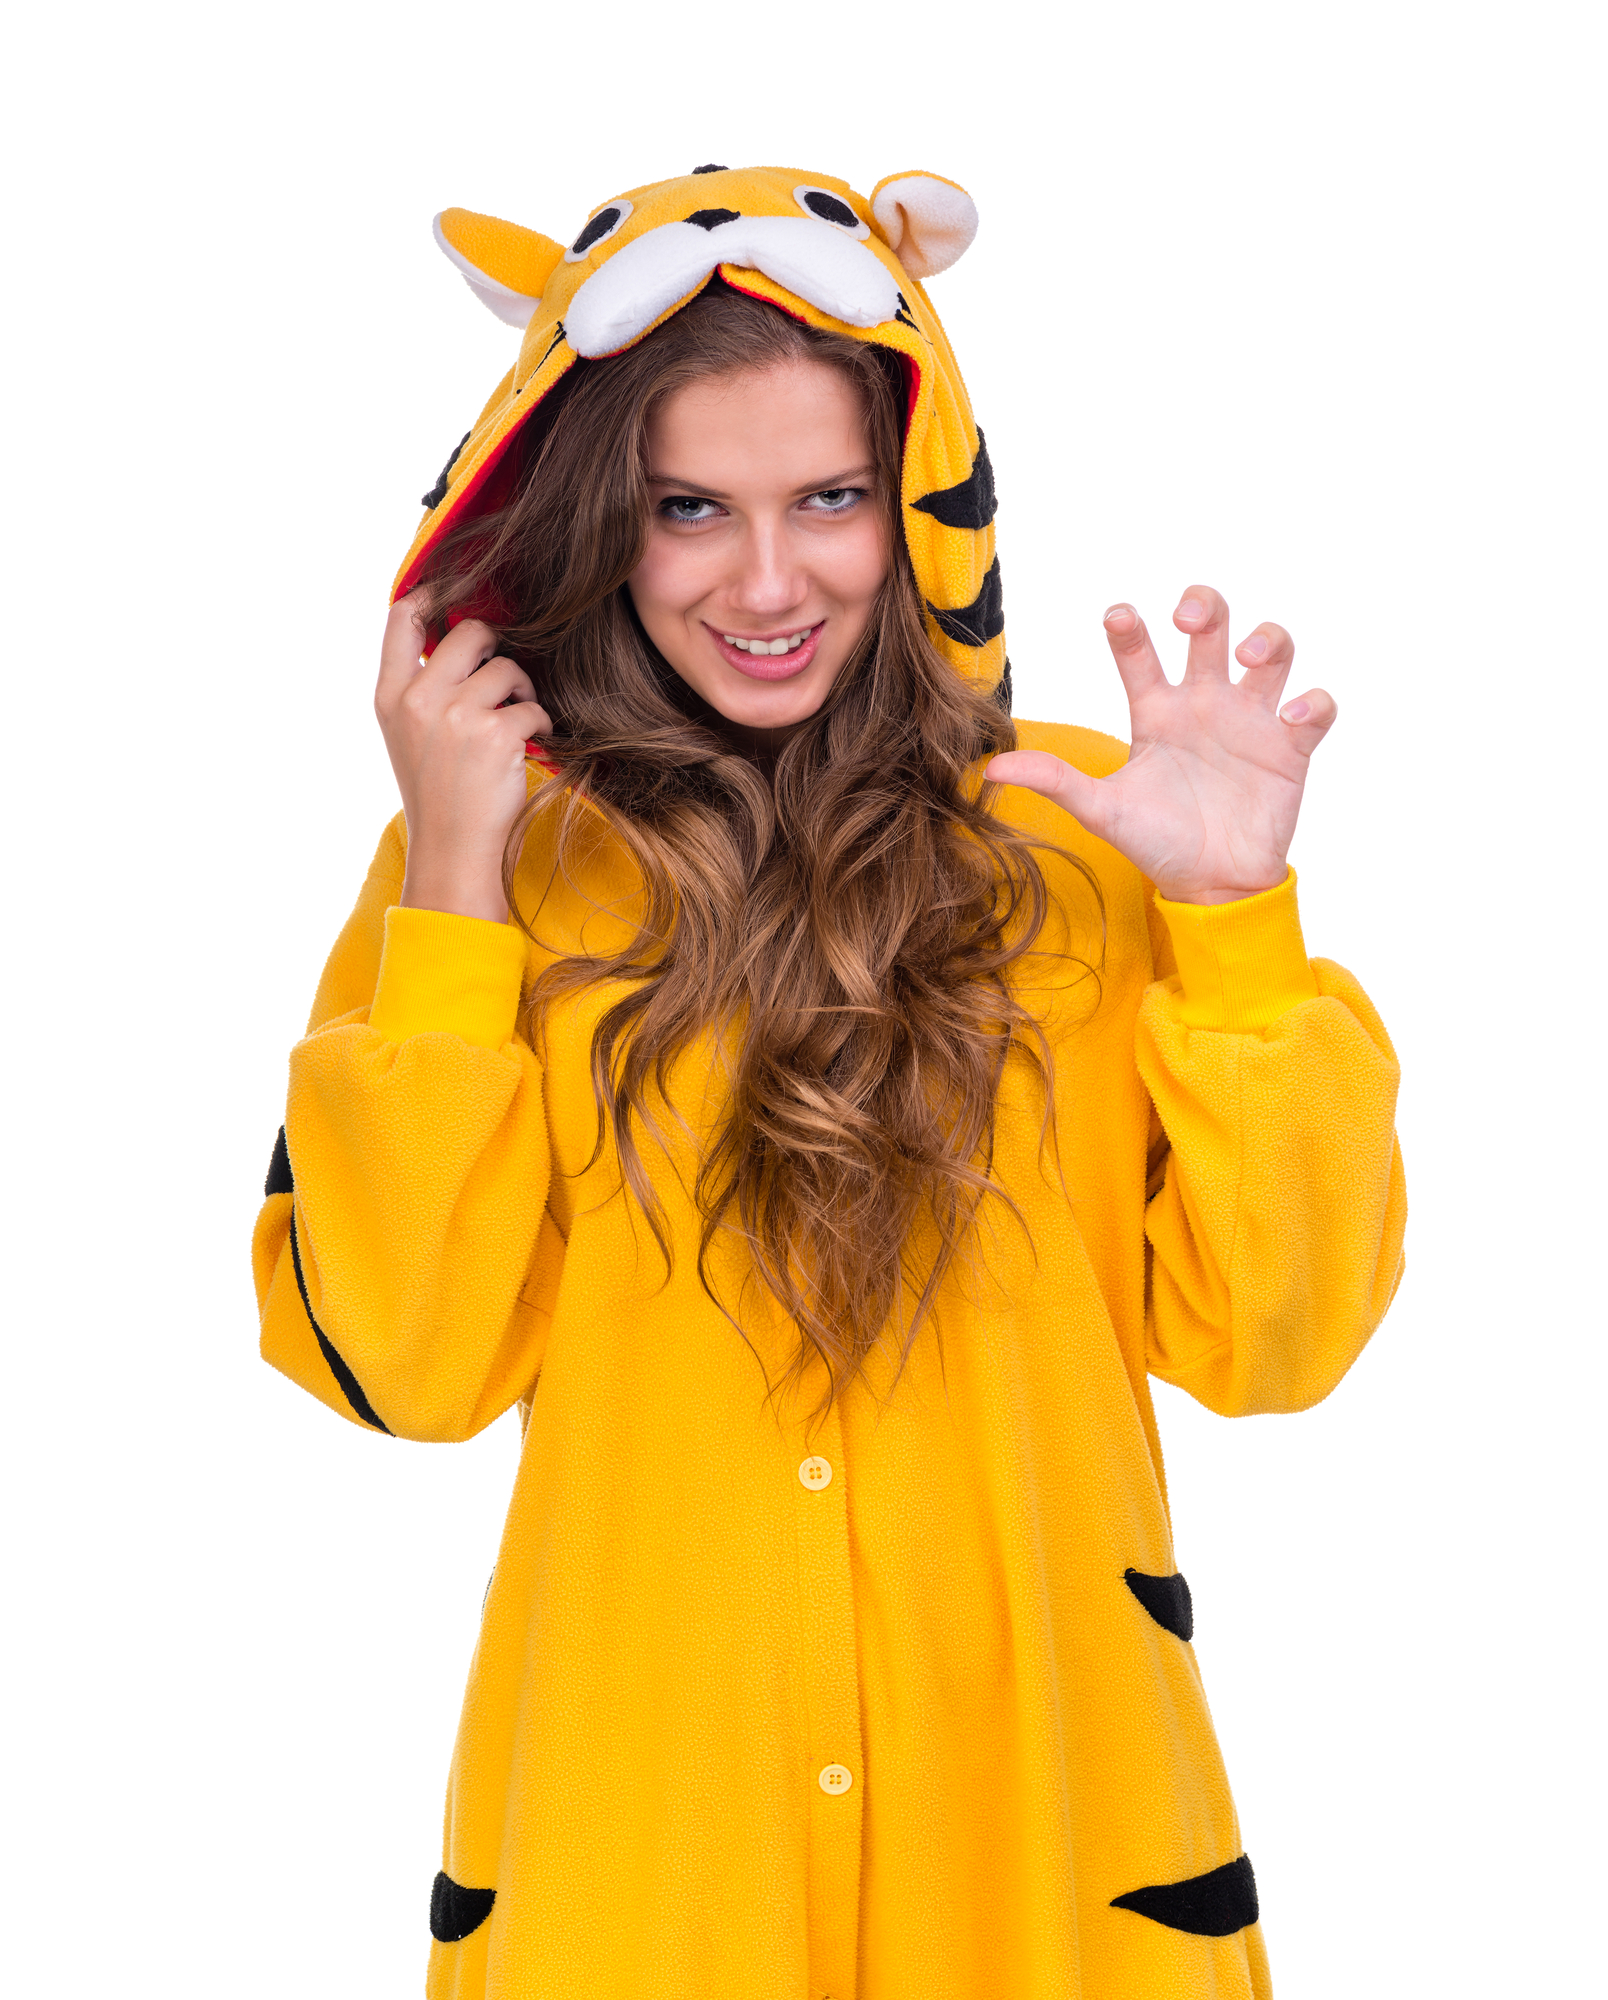 A woman in a yellow tiger costume posing at a pajama crawl event.